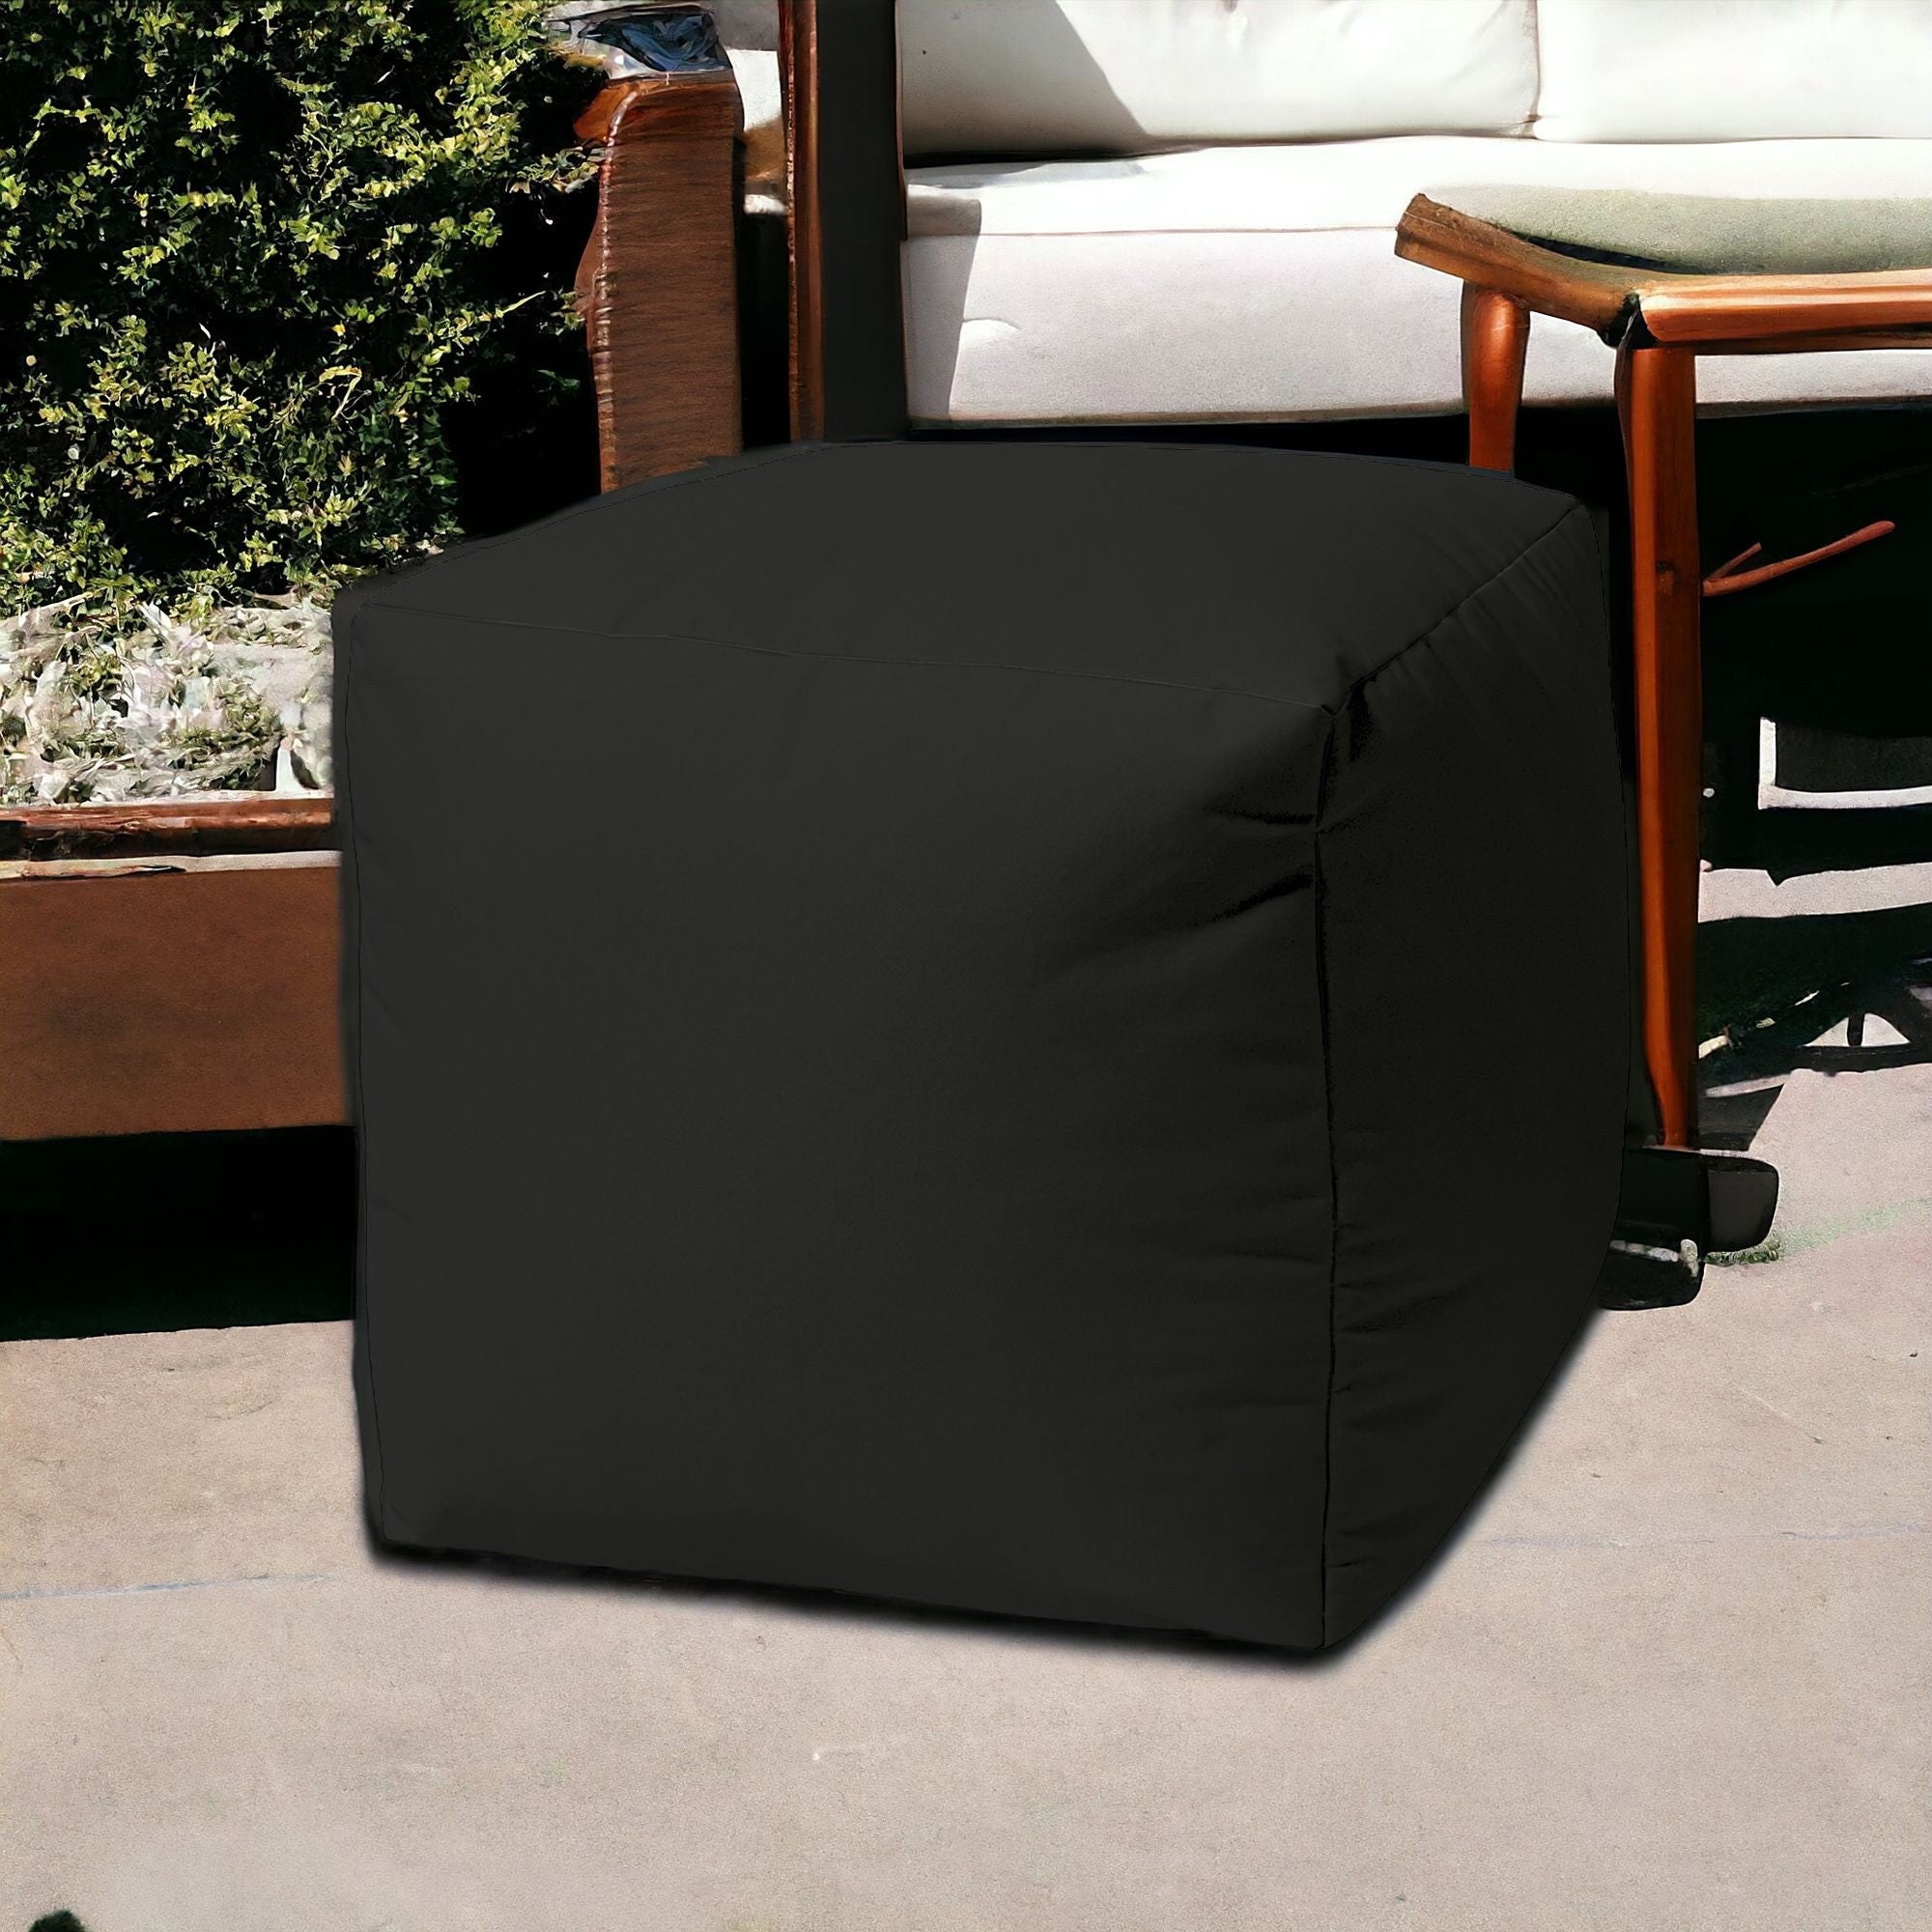 17" Cool Jet Black Solid Color Indoor Outdoor Pouf Ottoman